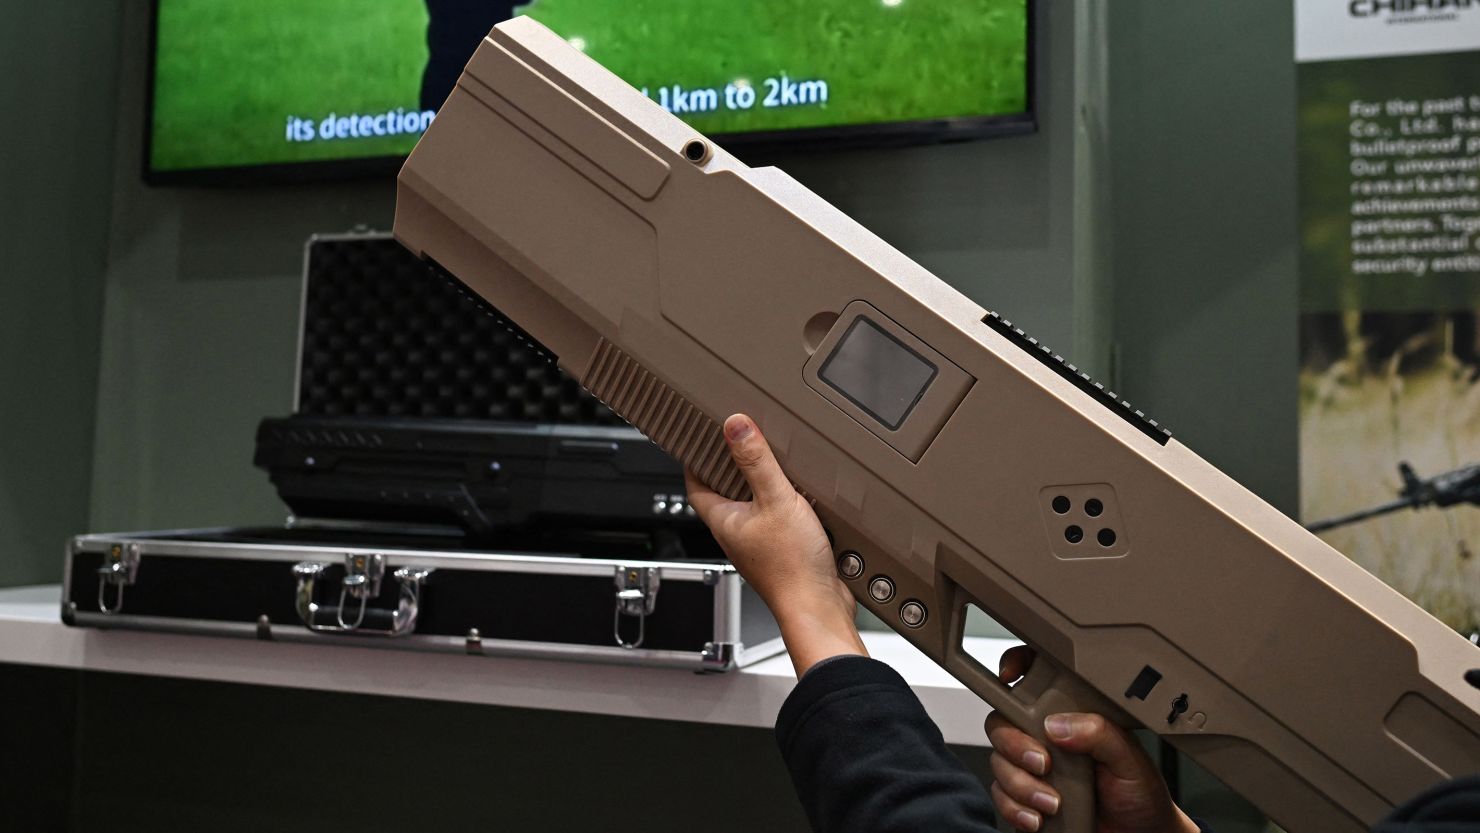 A handheld drone detection jammer is displayed during a security exhibition in Villepinte, a suburb of Paris, France, on November 14, 2023.